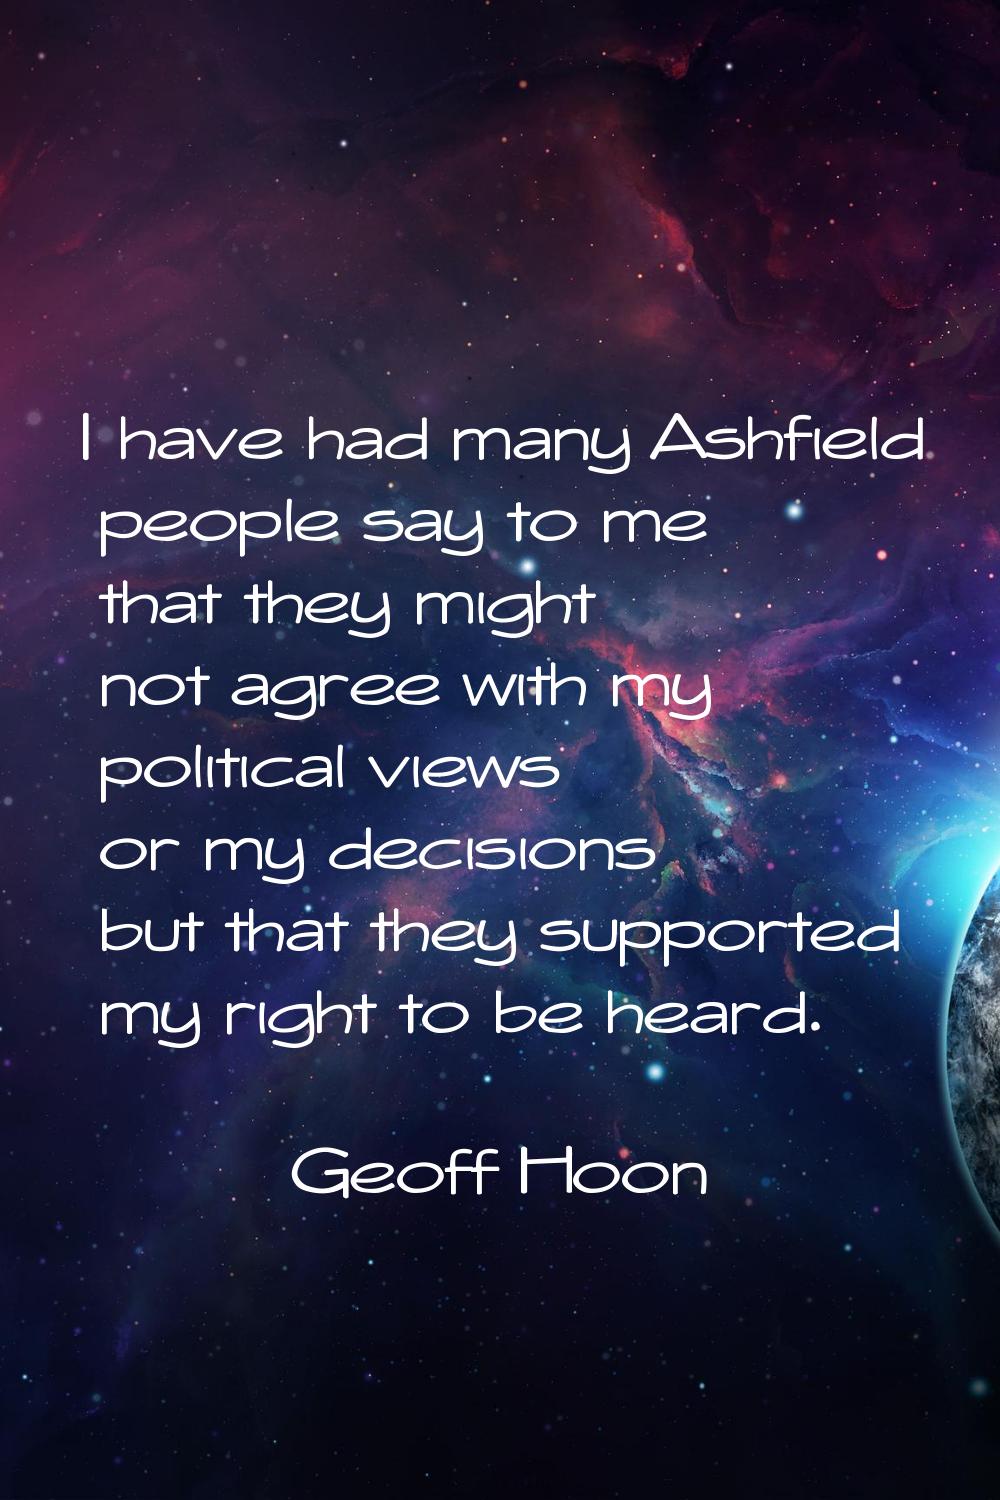 I have had many Ashfield people say to me that they might not agree with my political views or my d